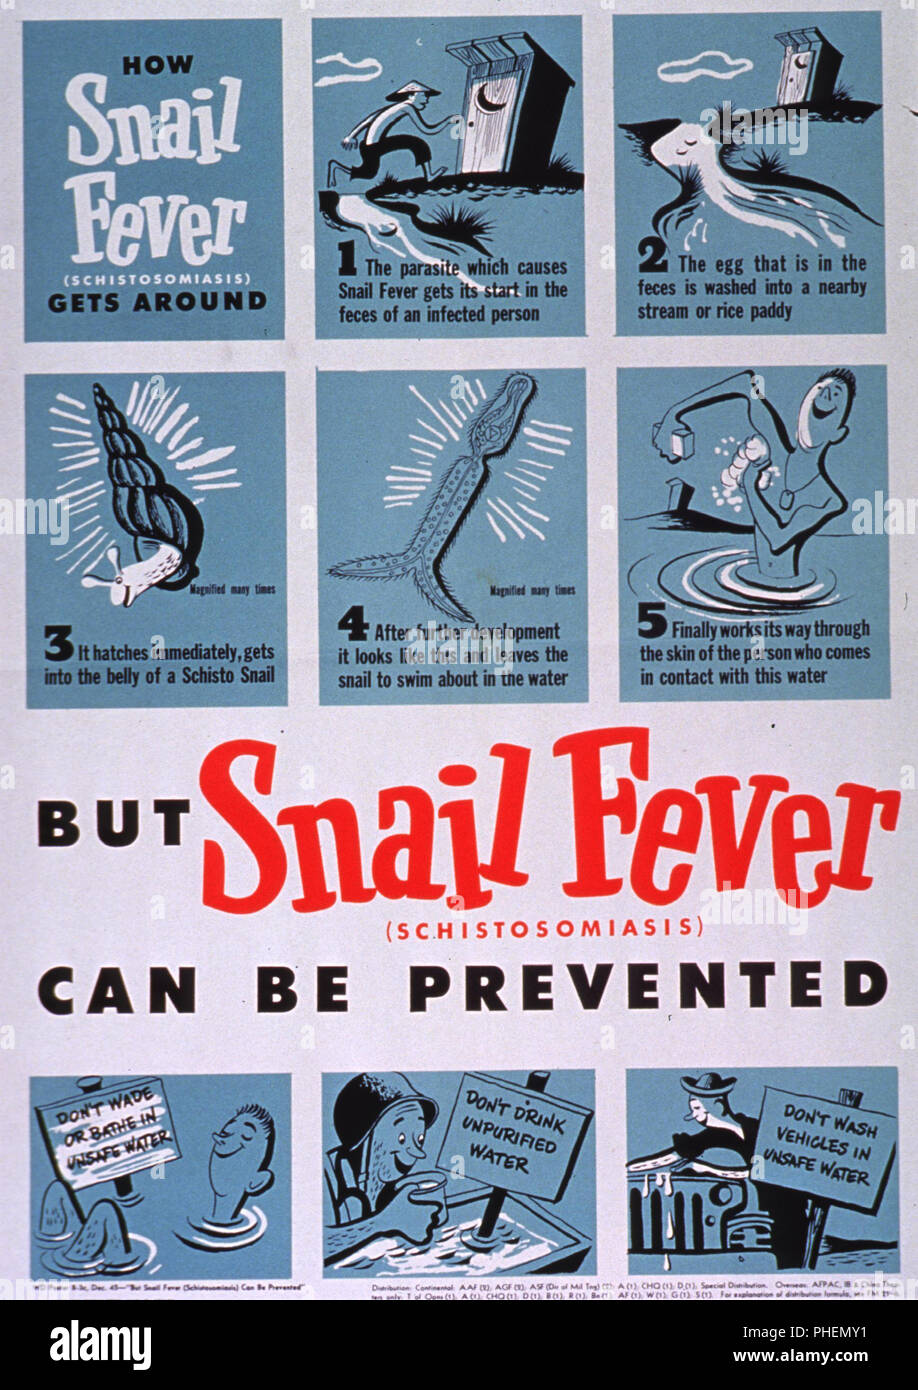 But snail fever (schistosomiasis) can be prevented ca. 1945 Stock Photo